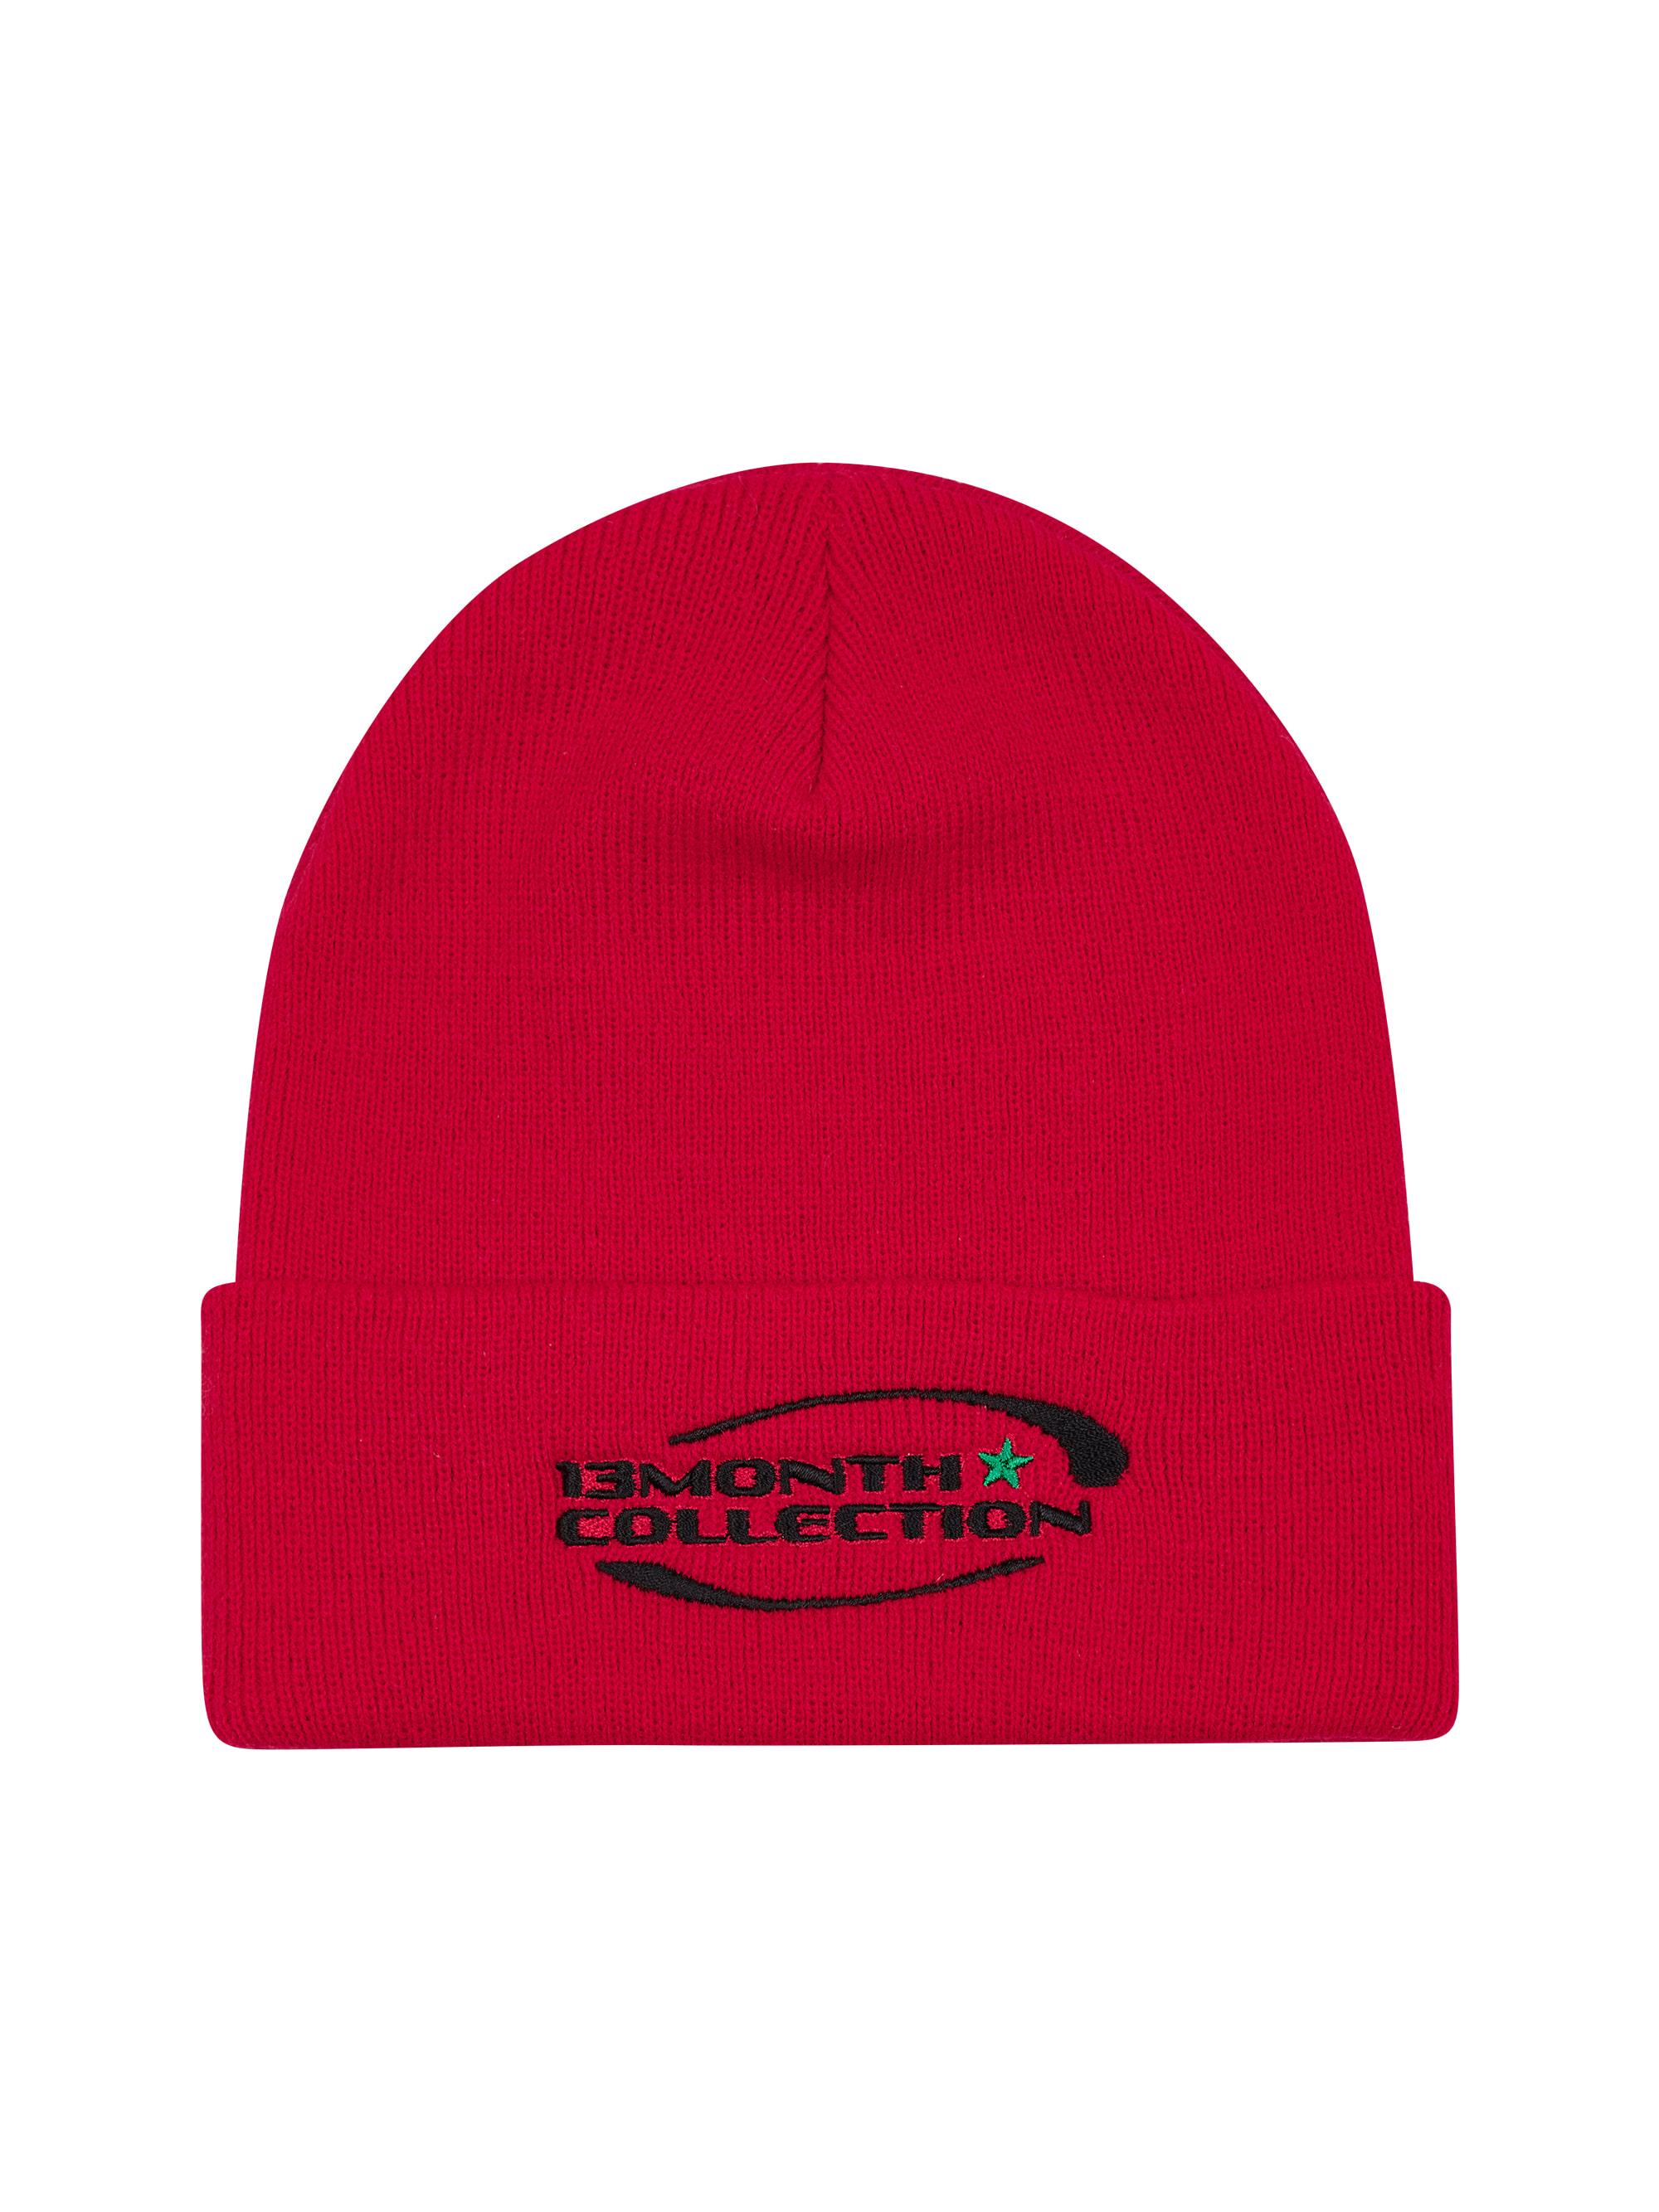 13M COLLECTION BEANIE (RED)